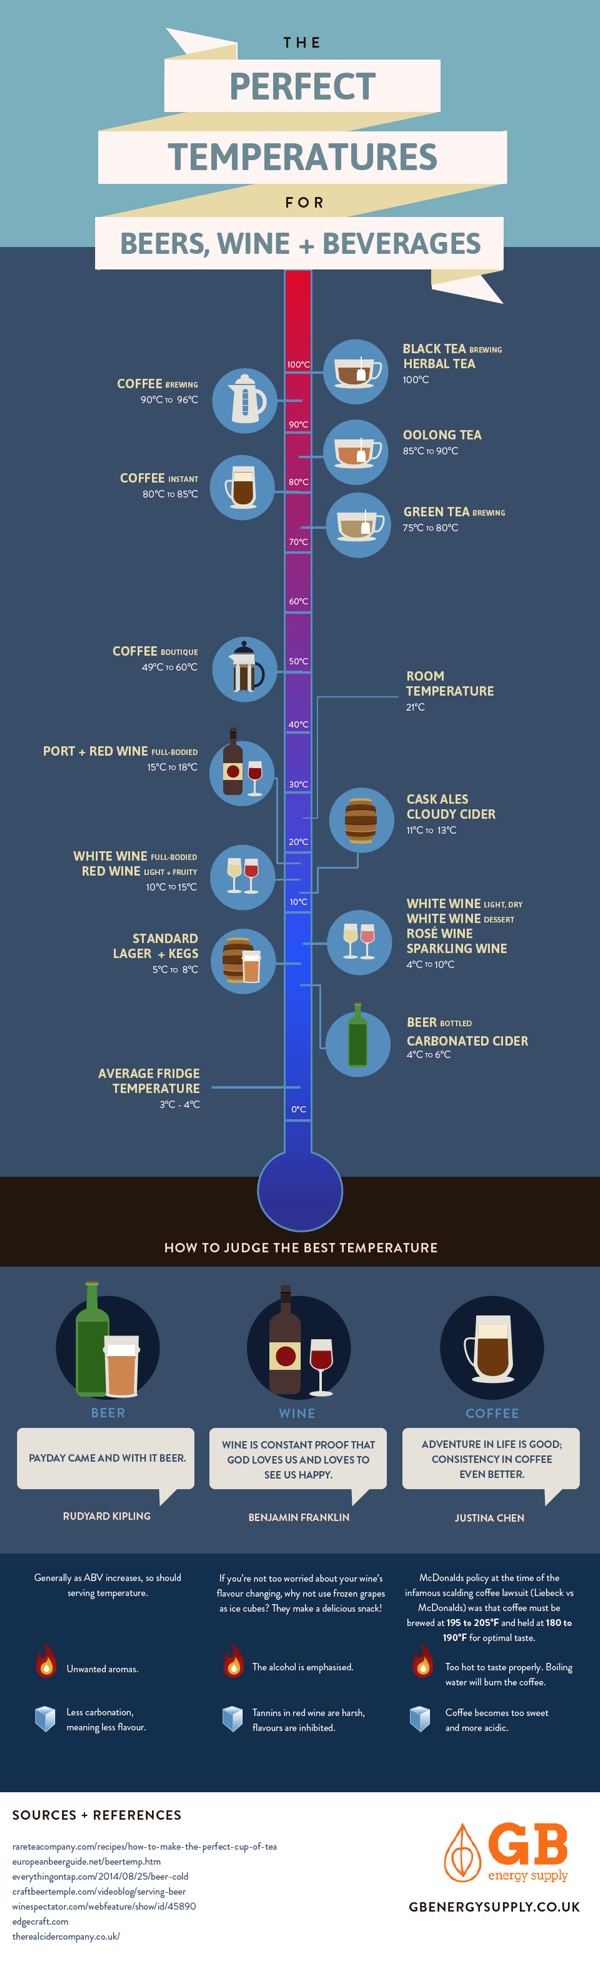 The Ideal Temperature for Beer, Coffee, and More infographic